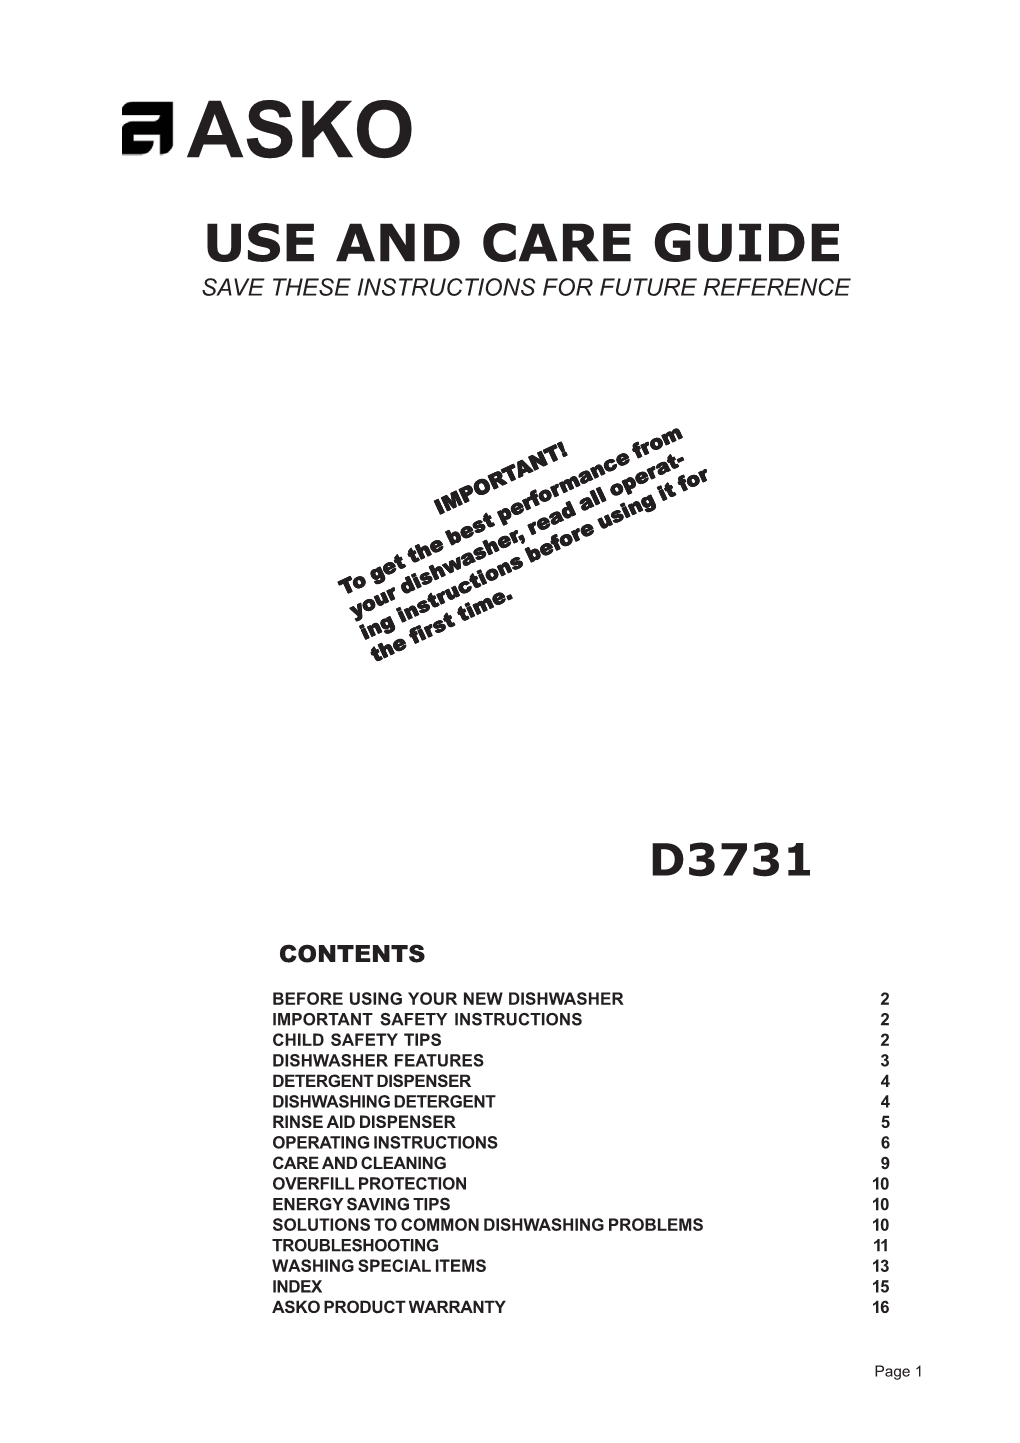 Asko Use and Care Guide Save These Instructions for Future Reference